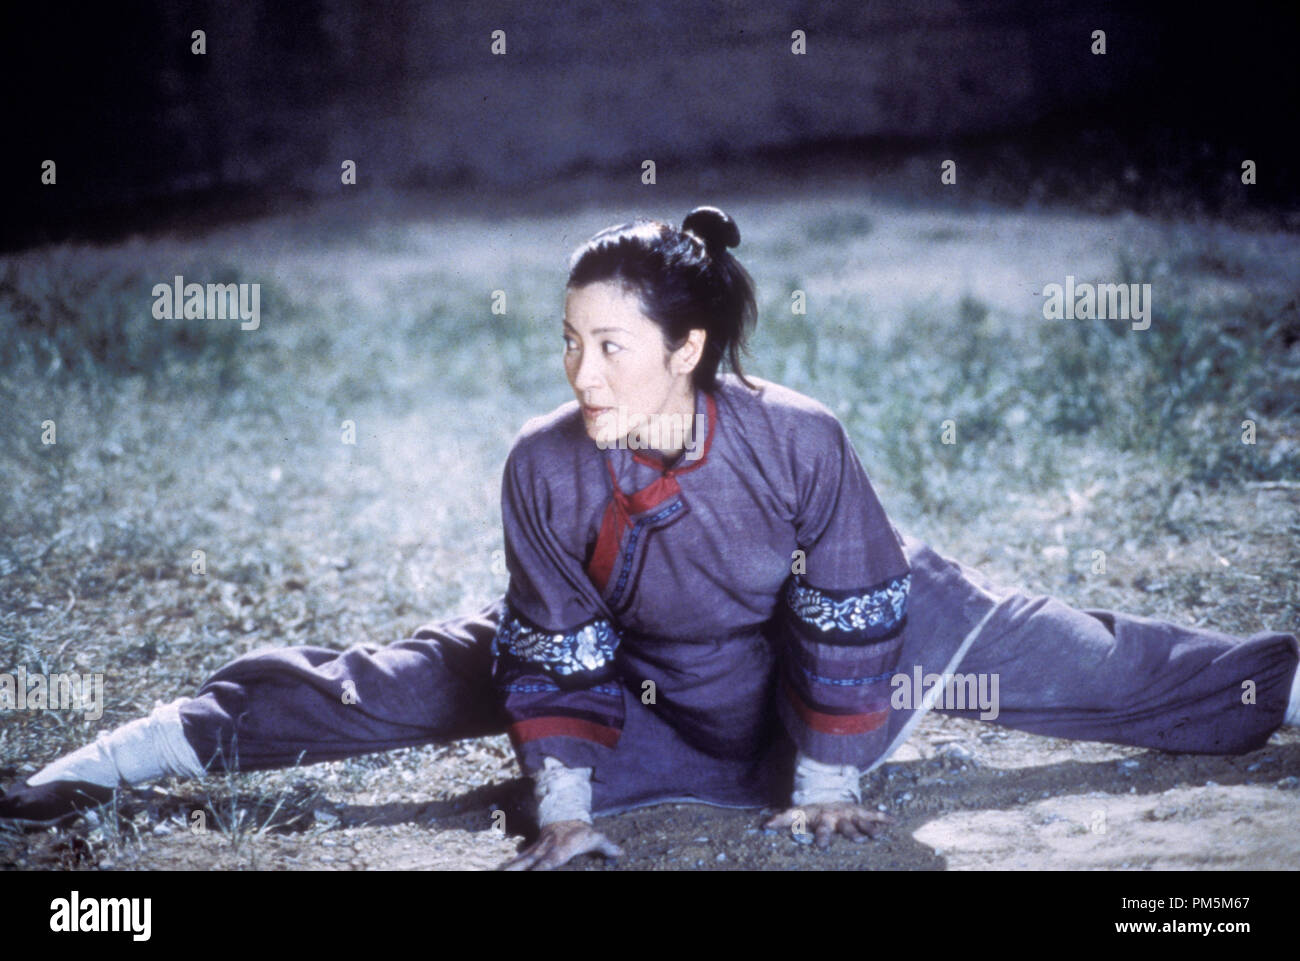 Film Still / Publicity Stills from 'Crouching Tiger, Hidden Dragon' Michelle Yeoh © 2000 Sony Pictures Classics Photo Credit: Chan Kam Chuen File Reference # 30846672THA  For Editorial Use Only -  All Rights Reserved Stock Photo